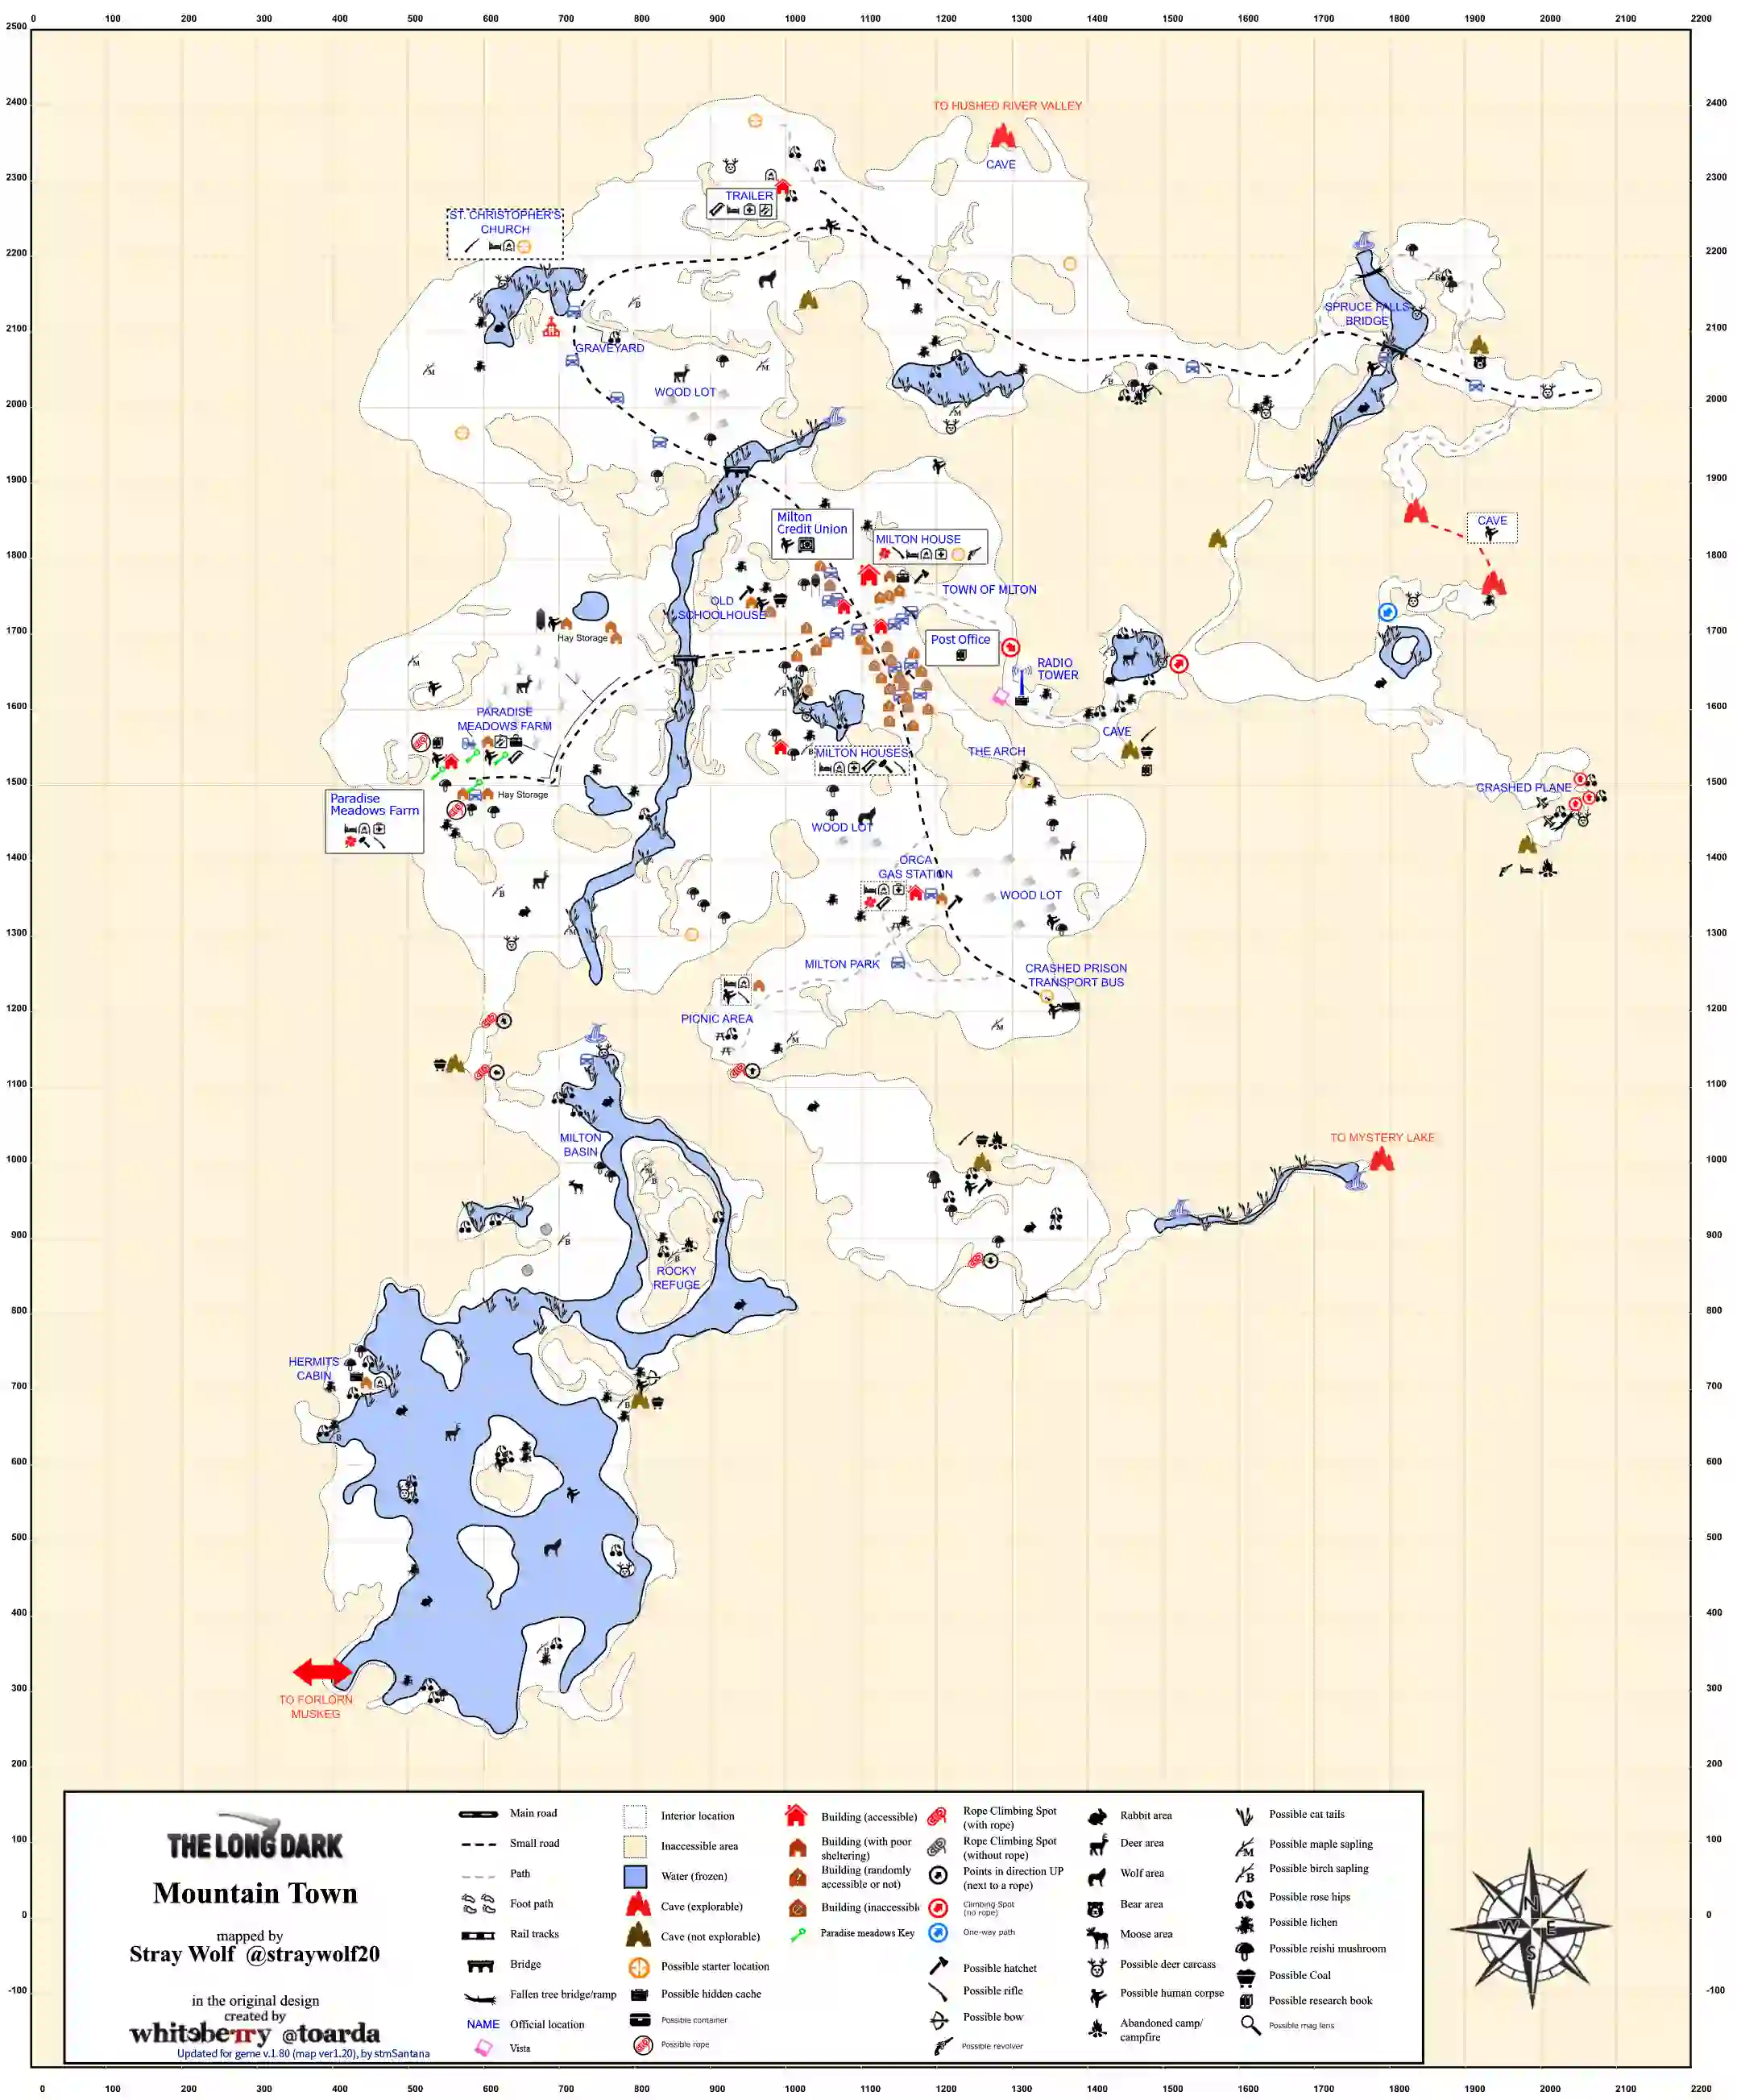 The Long dark Mountain Town Map. This map includes all detain of this place on the illustrated map.